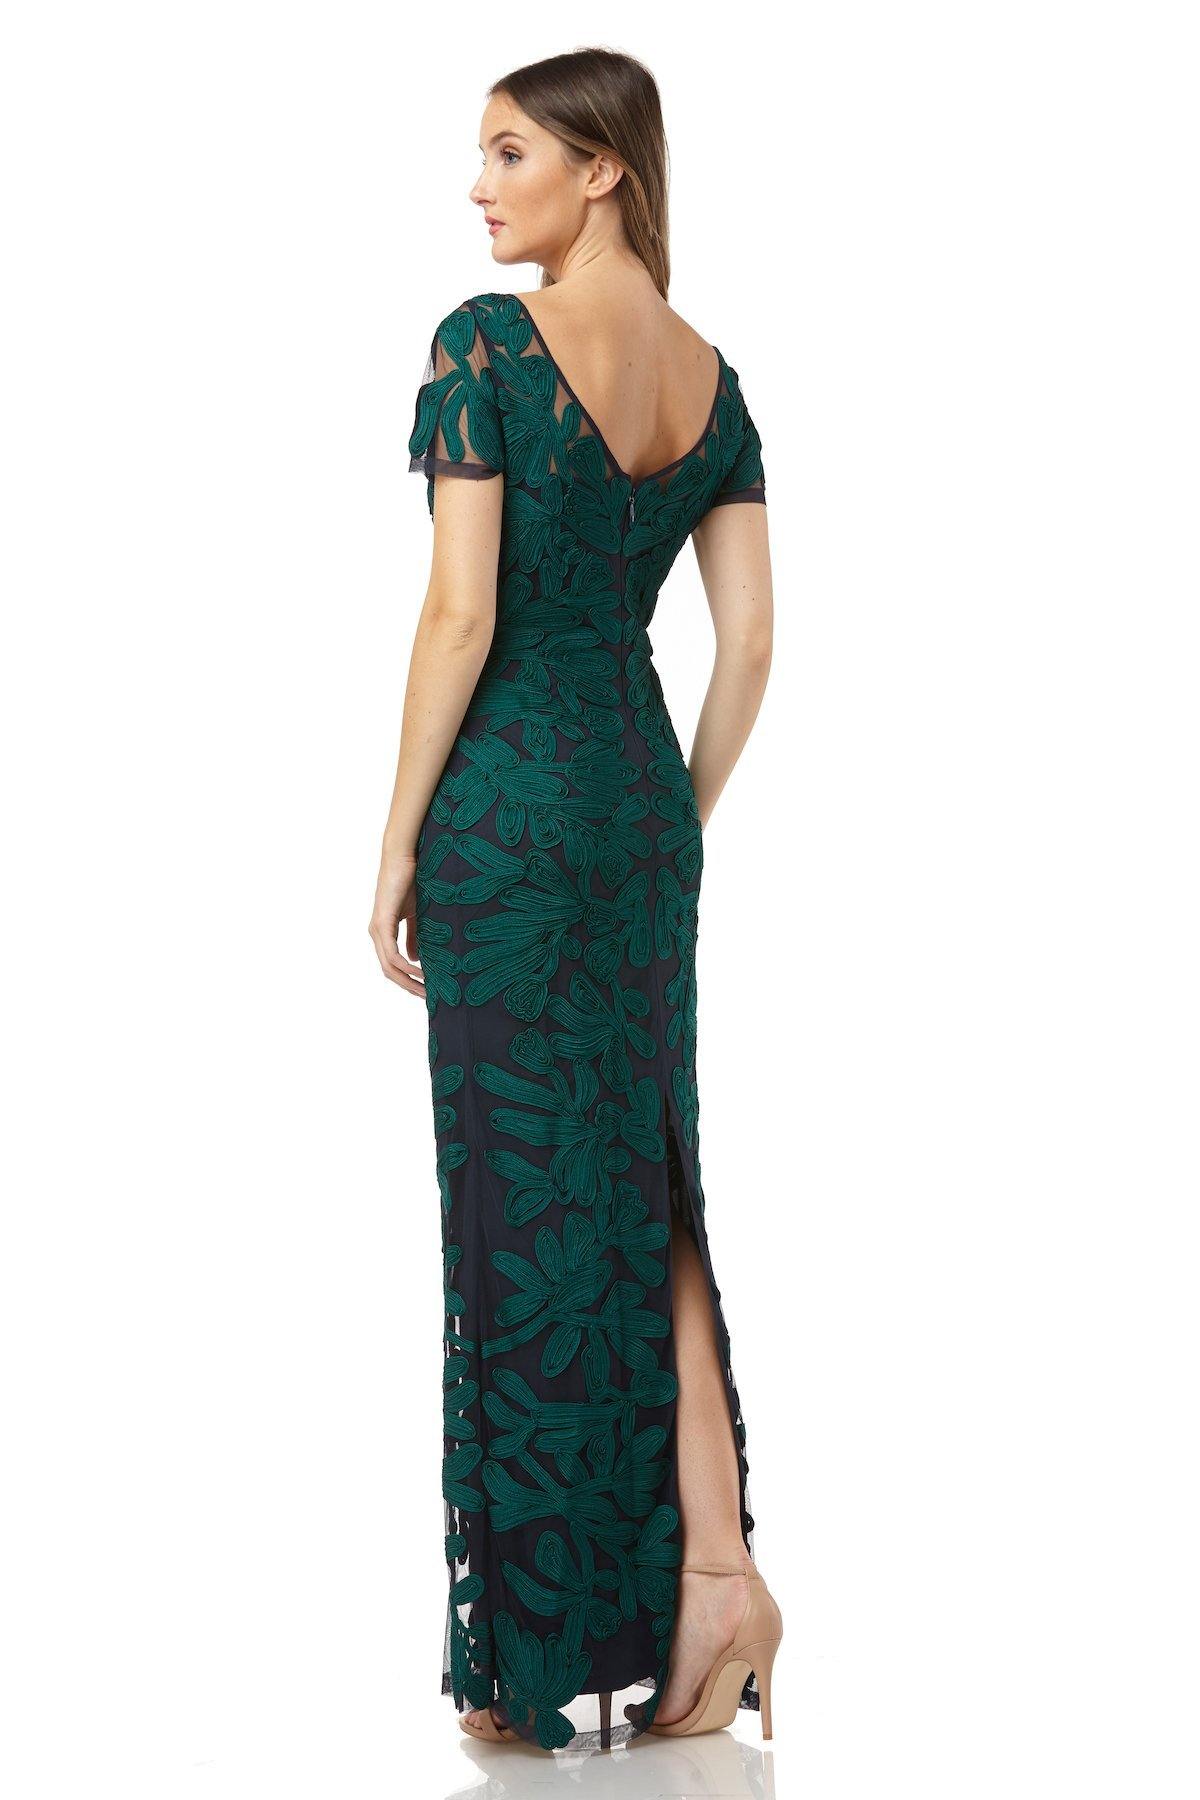 JS Collections Long Formal Sheath Dress 866747 - The Dress Outlet